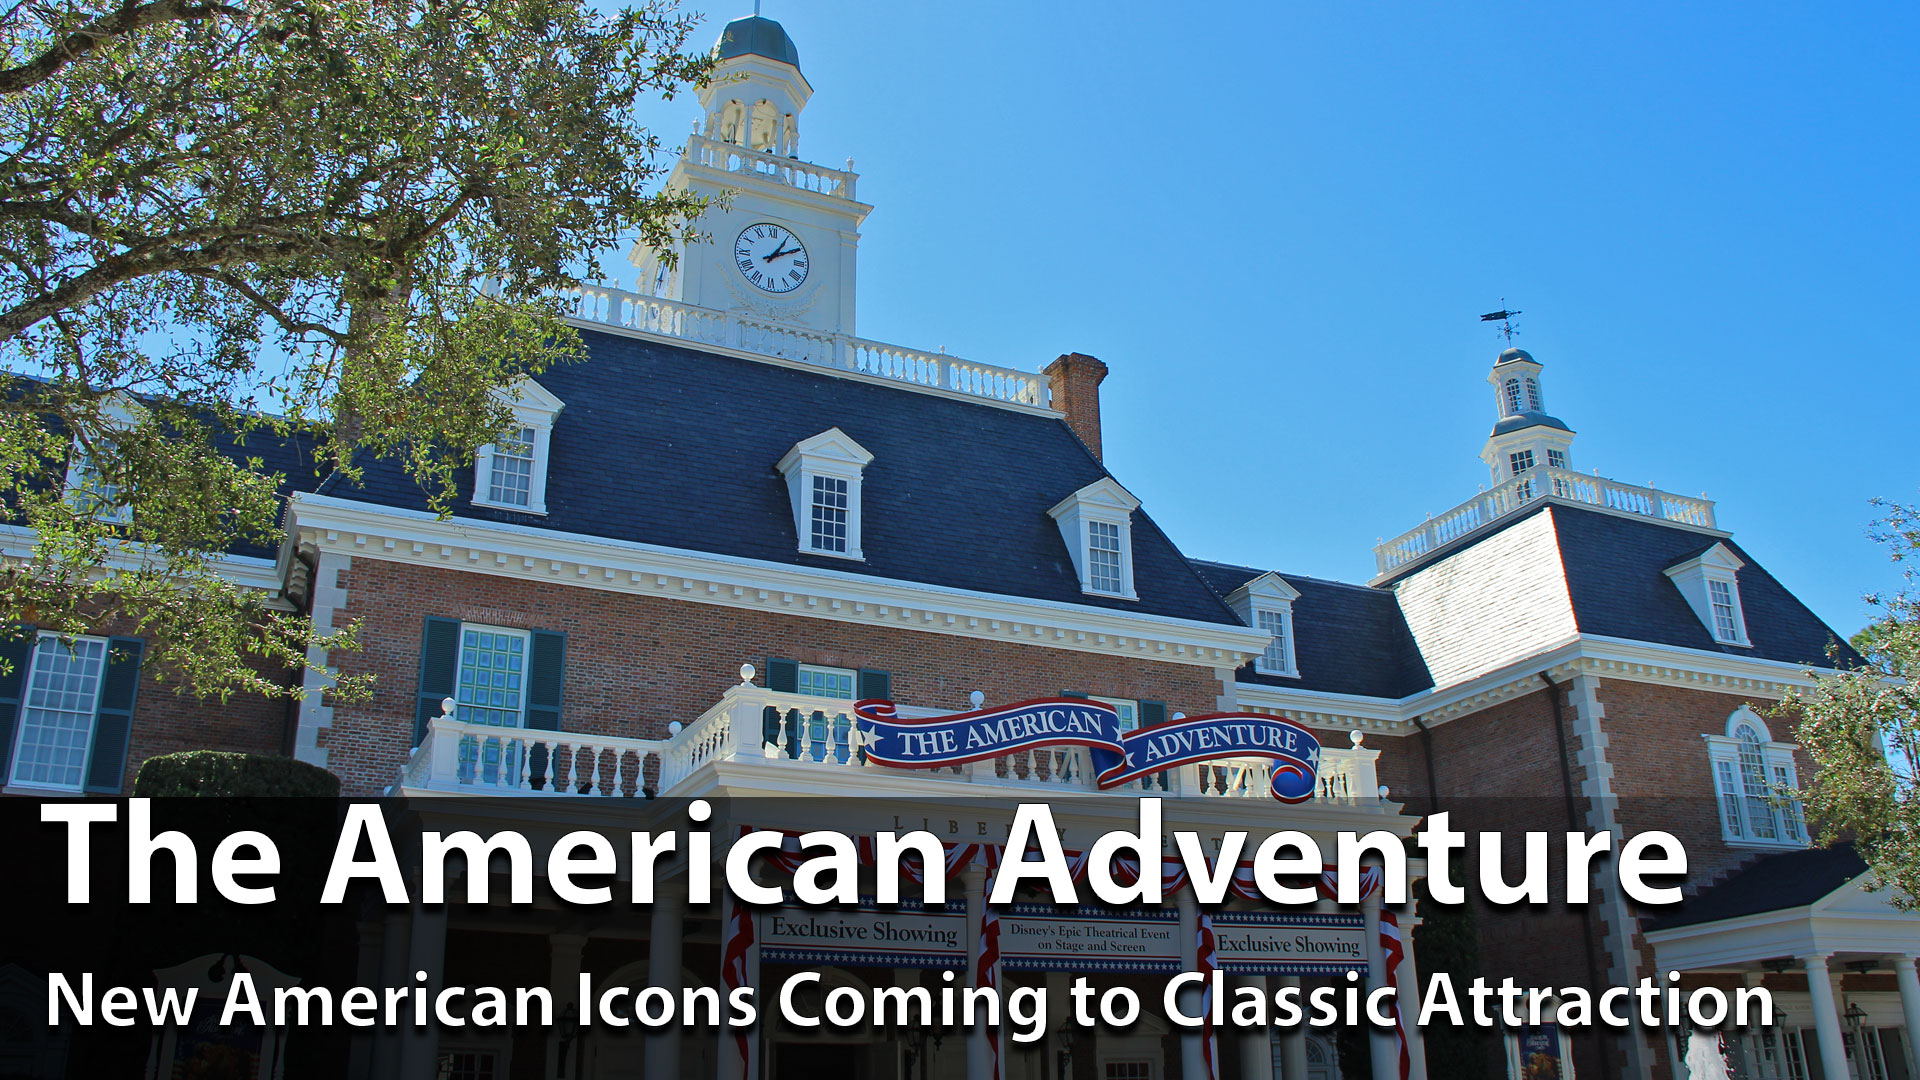 New American Icons Coming to The American Adventure at Epcot!